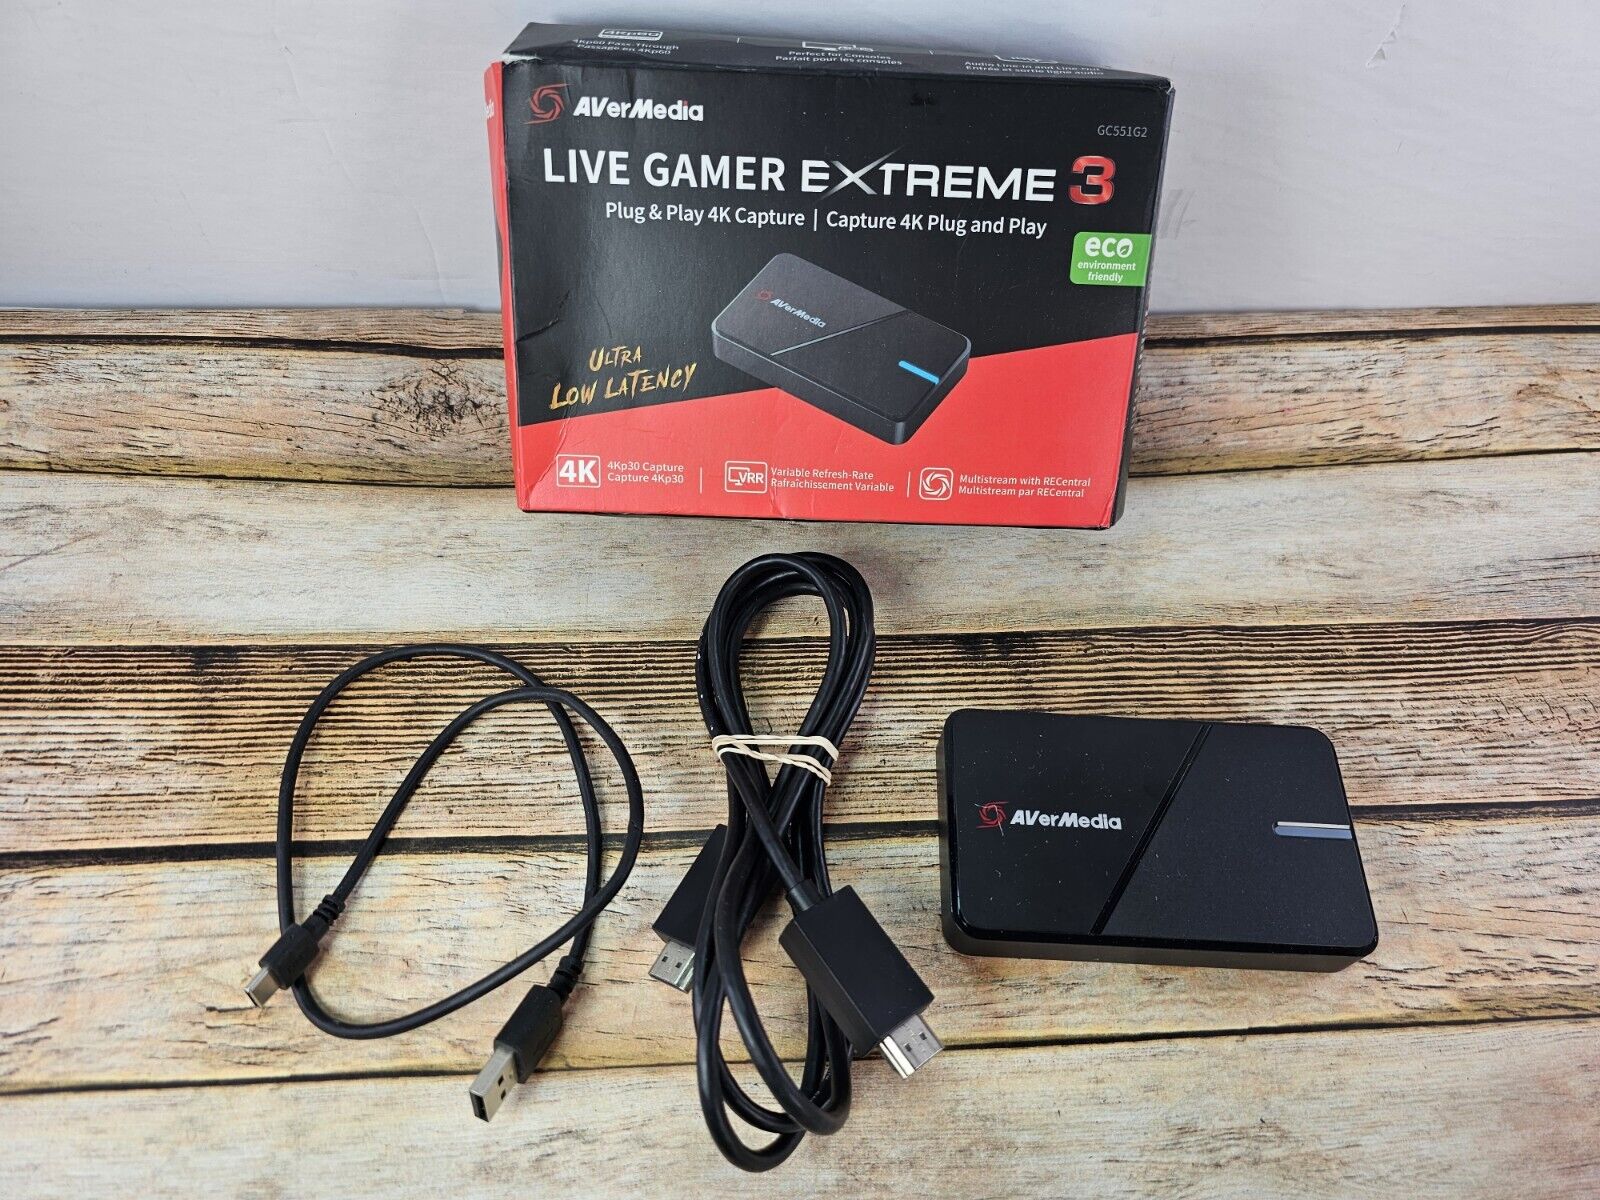 AVerMedia GC551G2 Live Gamer Extreme 3, Plug and Play 4K Capture Card for Gaming